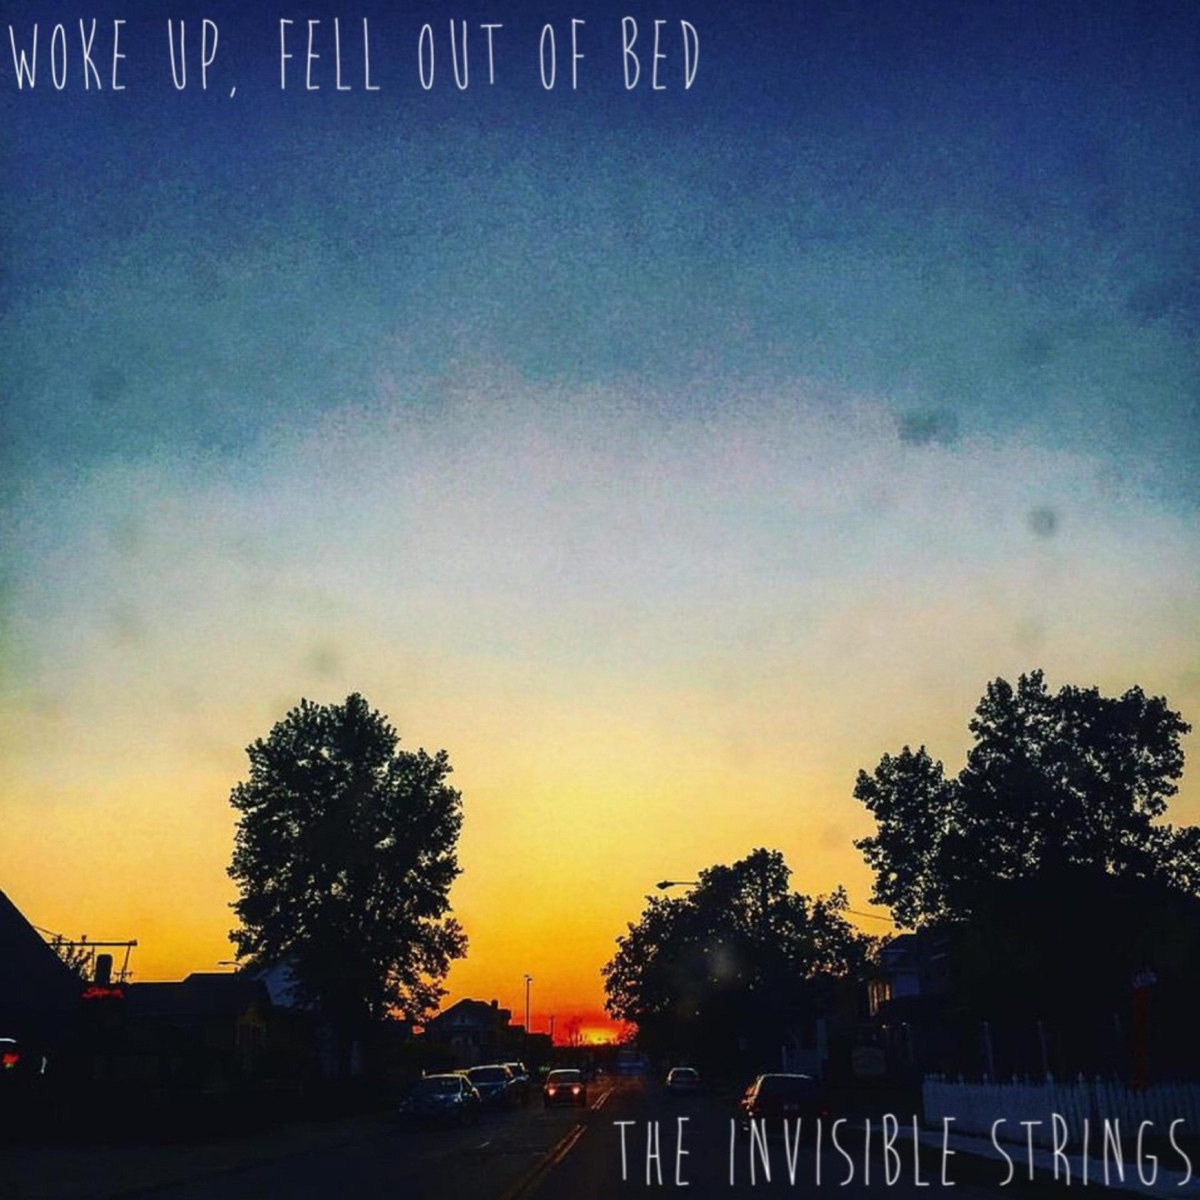 Woke Up Fell Out Of Bed Album Cover By The Invisible Strings